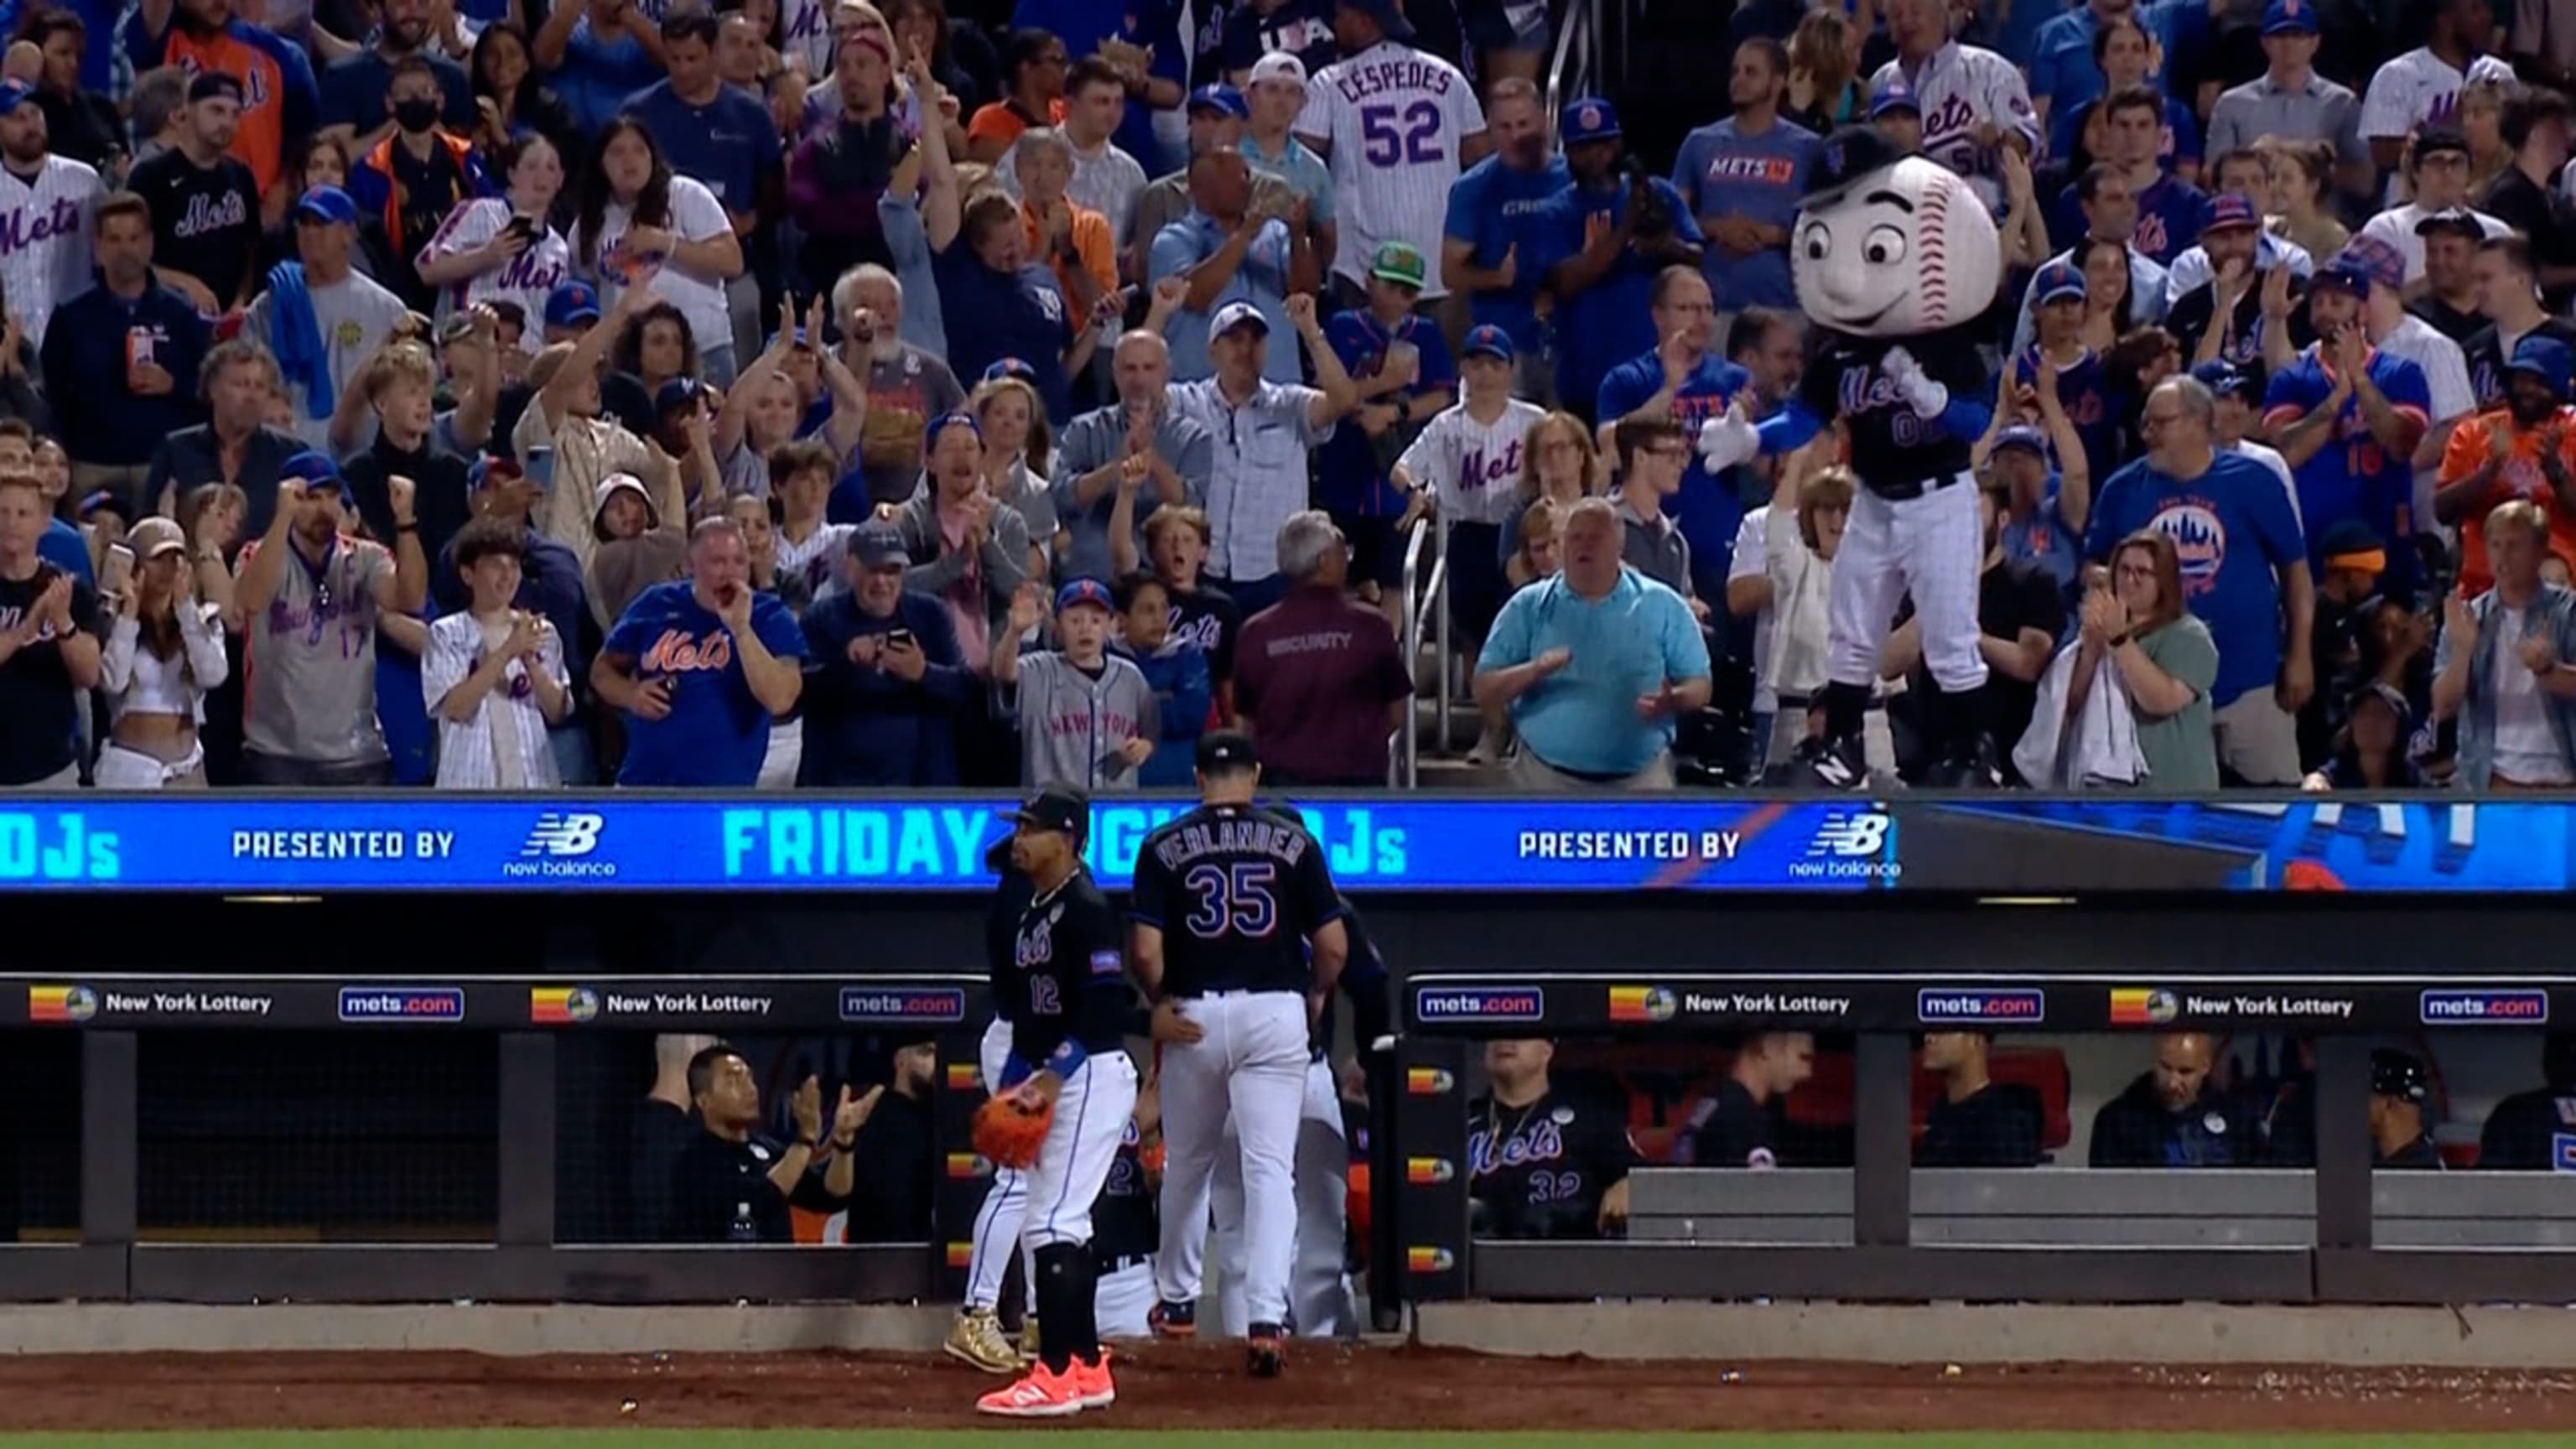 VIDEO: Mets Players Simulate Final Out of World Series at Spring